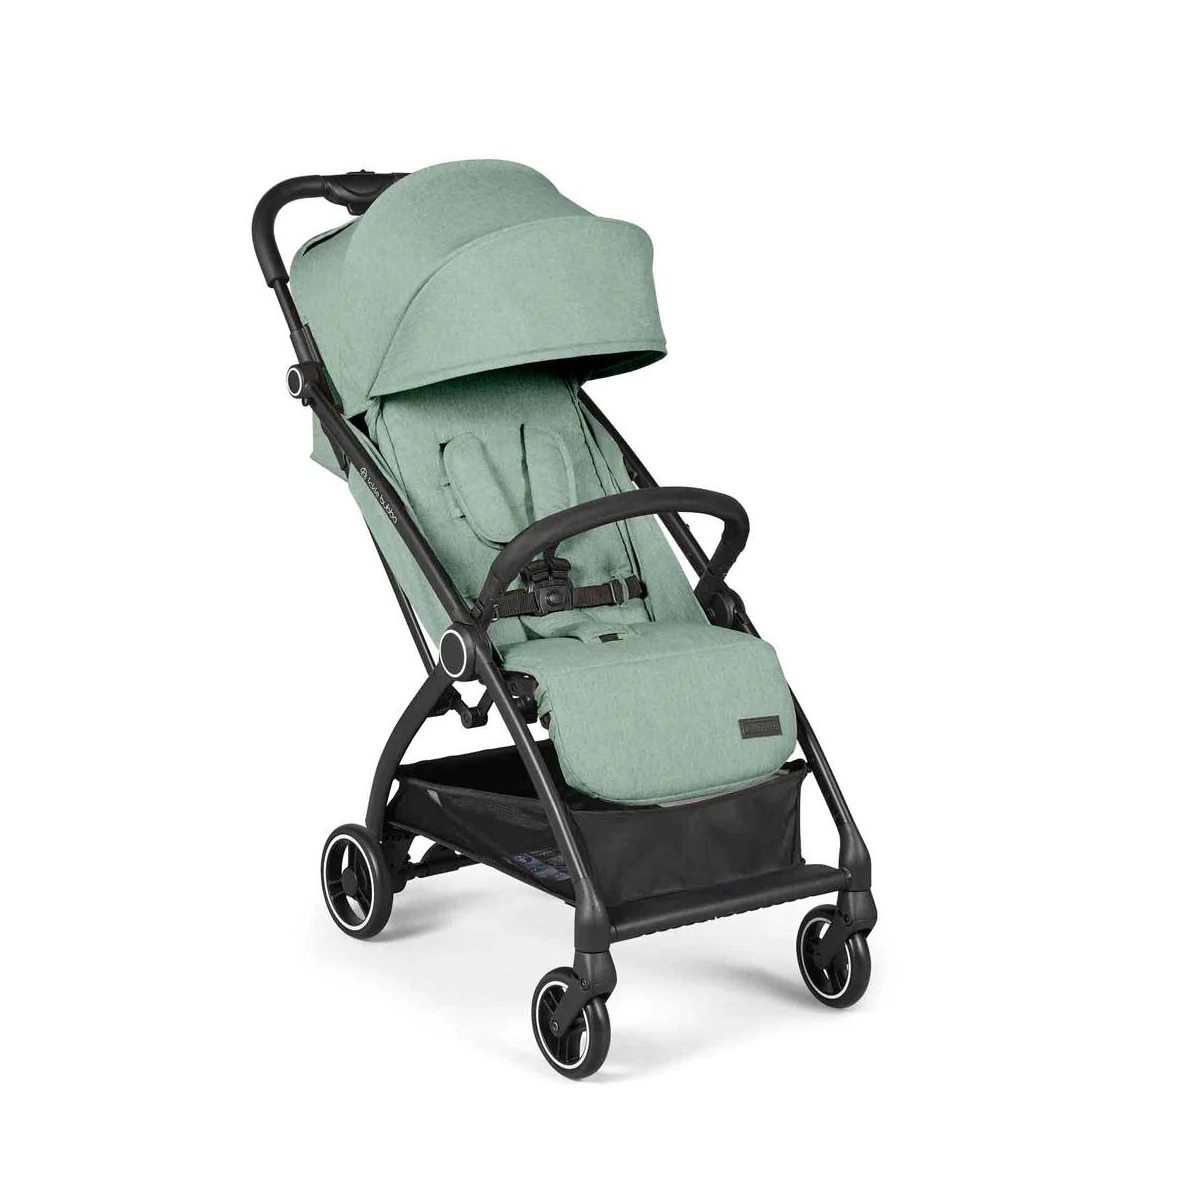 Image of Ickle Bubba Aries Autofold Stroller - Sage Green